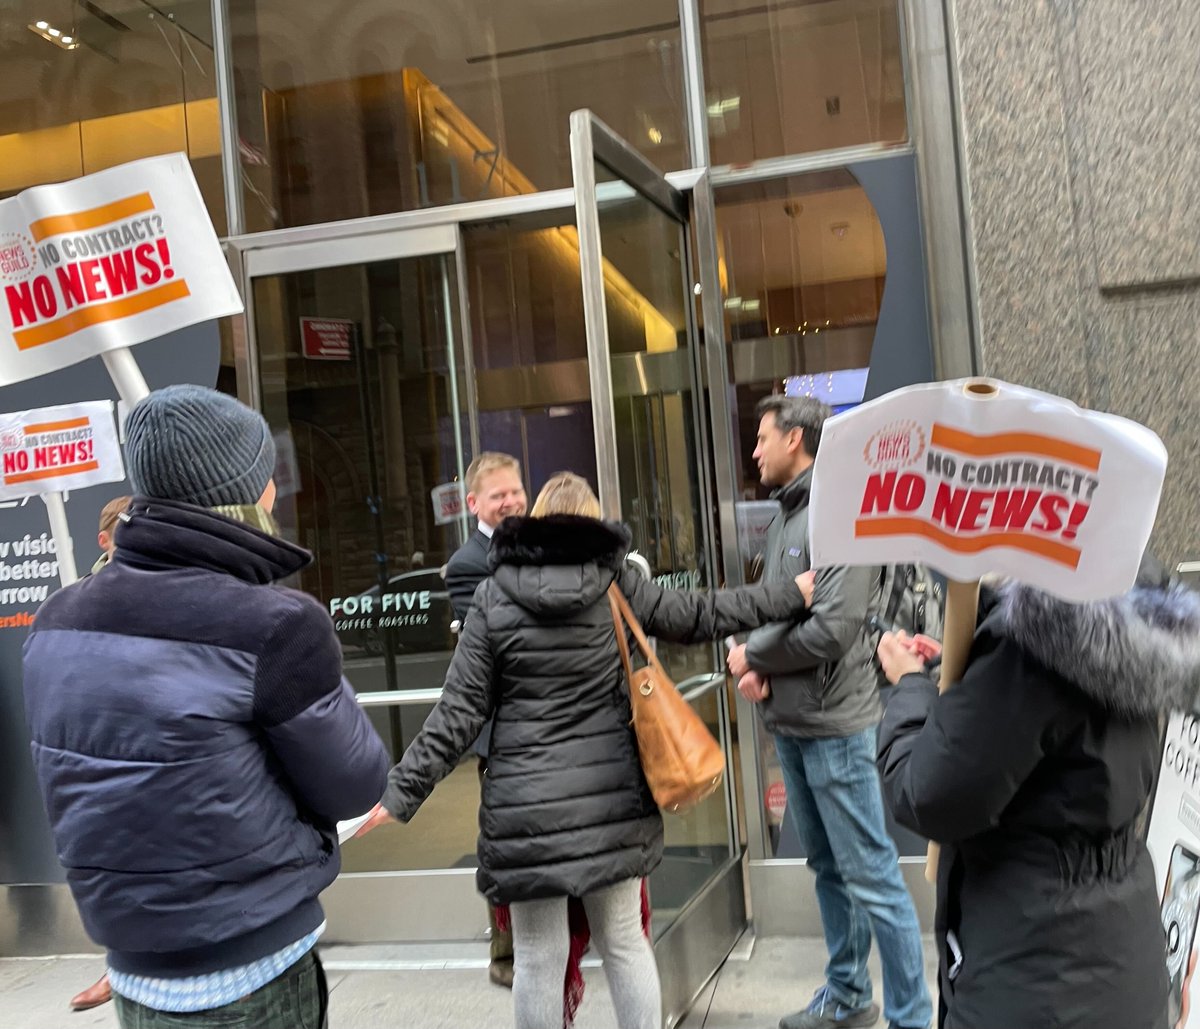 Excited to return to the bargaining table tomorrow morning. Let's get this deal done, @thomsonreuters. #ContractNEXT or #NoContractNoNews, the choice is yours, @sjhasker @Bascobert @aagalloni! Dec. 15 will be two years since our last contract, and we're ready to mark the date.